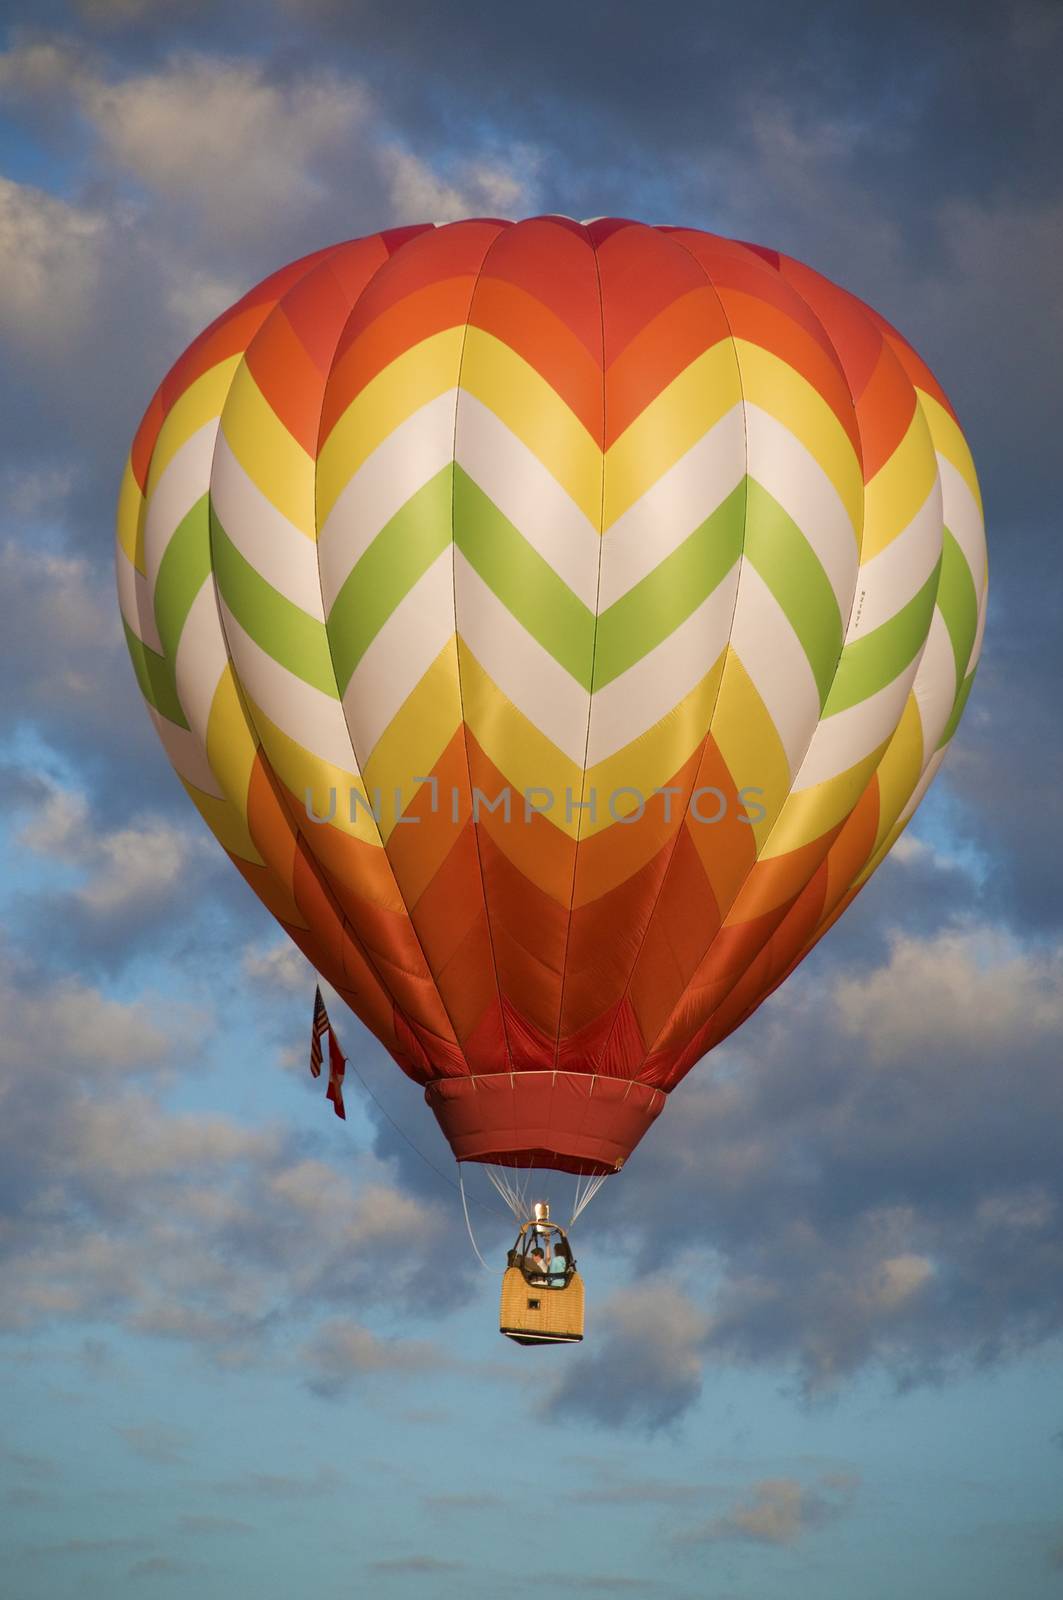 Orange and yellow hot-air balloon floating among clouds by Balefire9